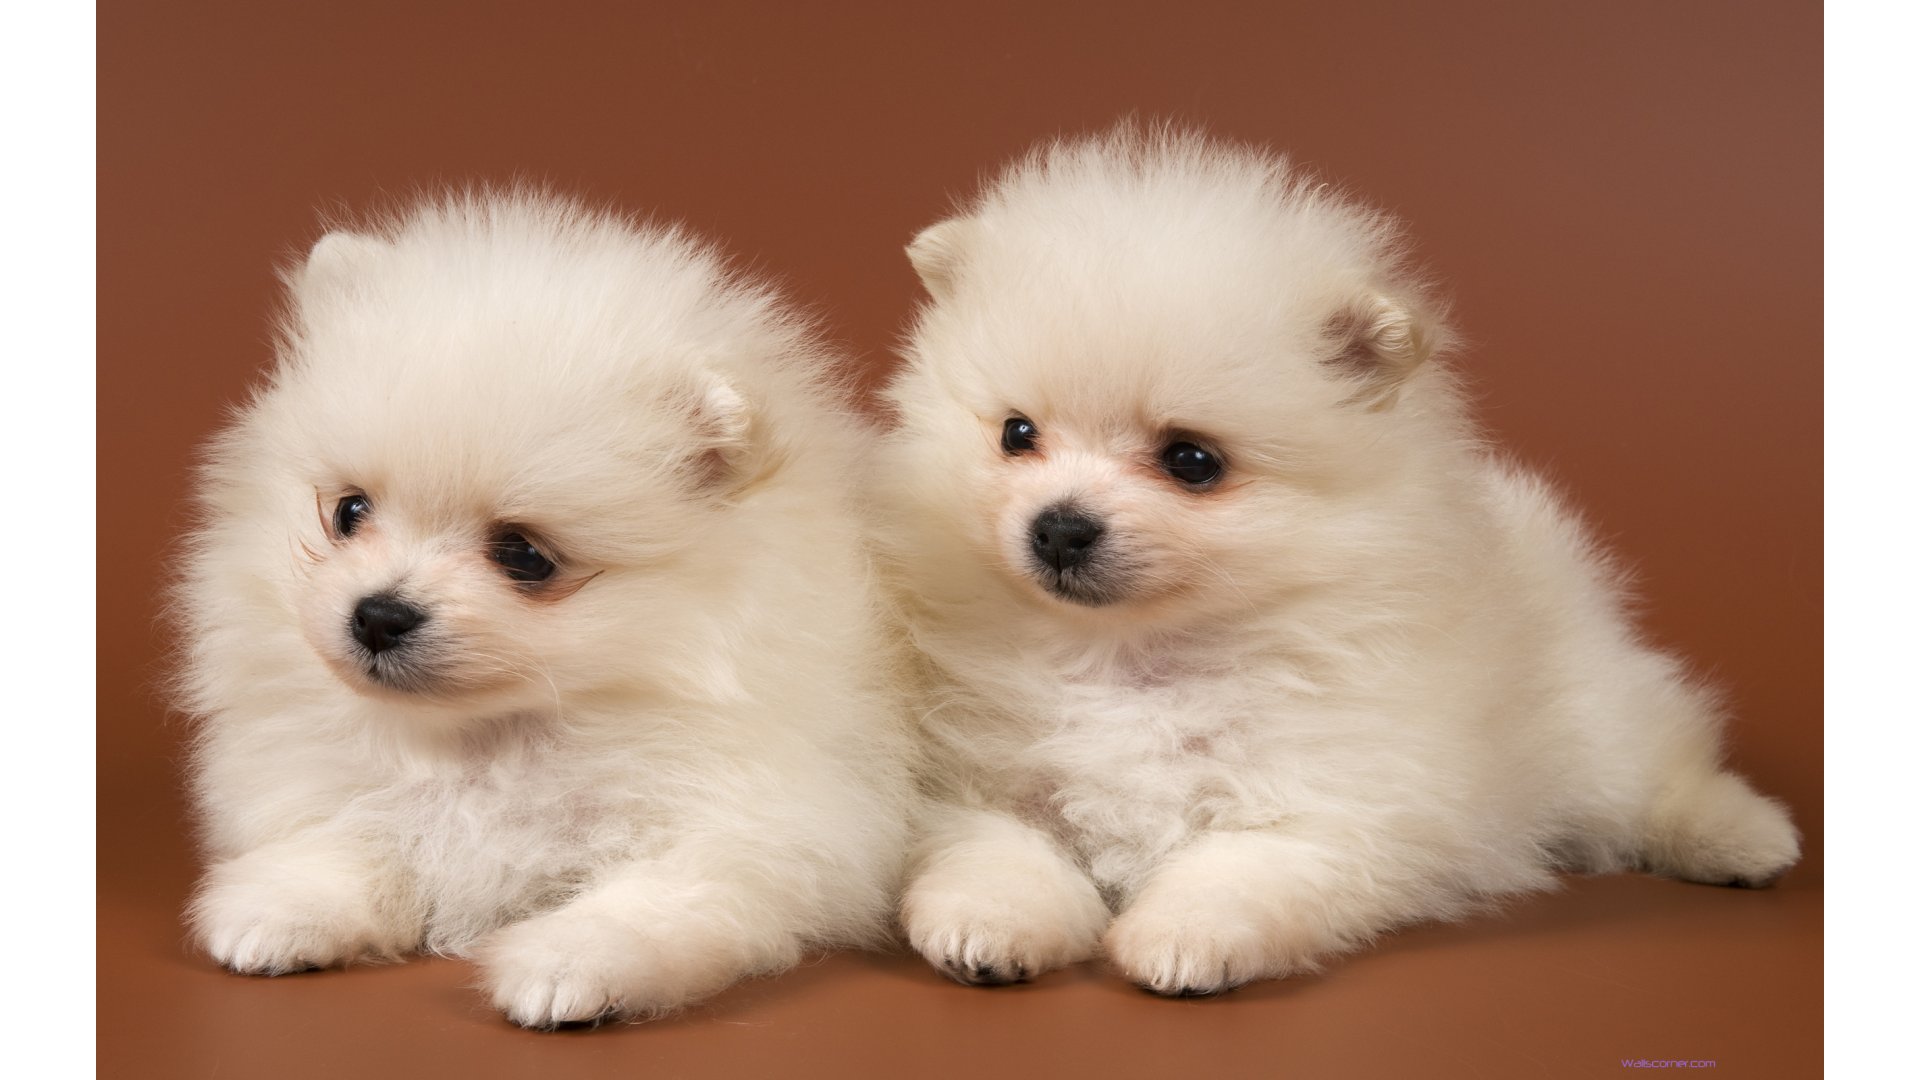 All Other Resolutions Of Cute Puppies Wallpaper Or